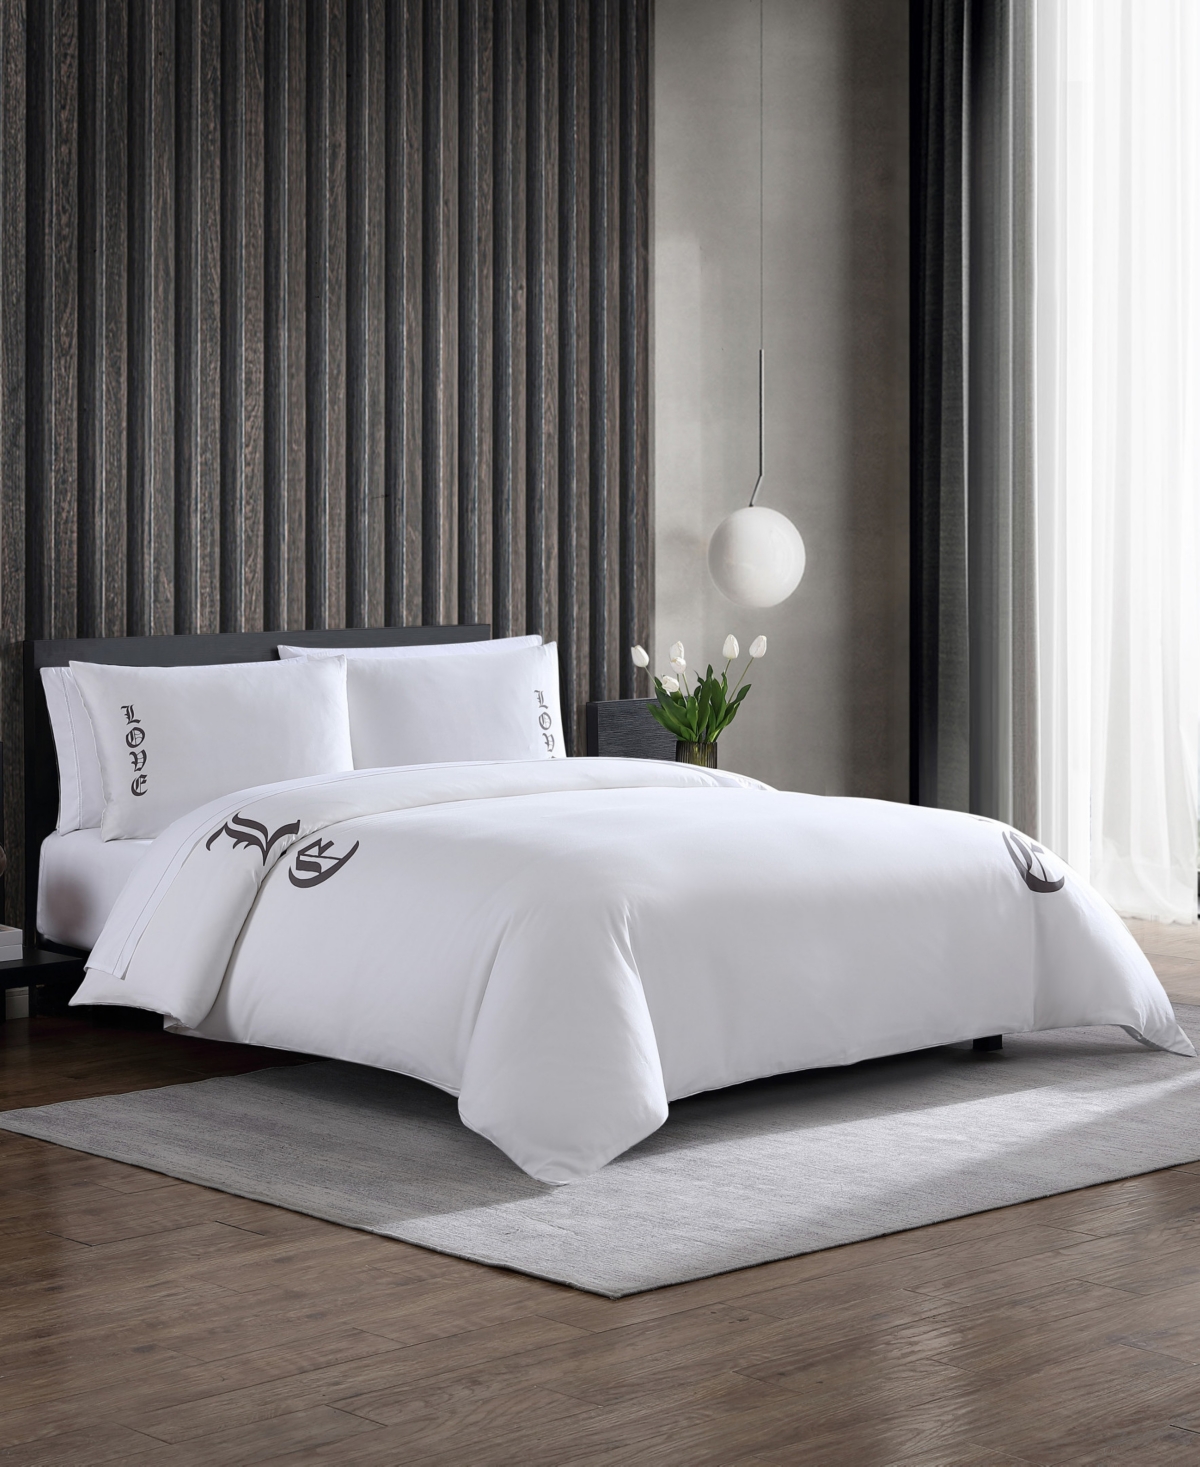 Vera Wang Closeout!  3 Piece Love Duvet Cover Set, King Bedding In White